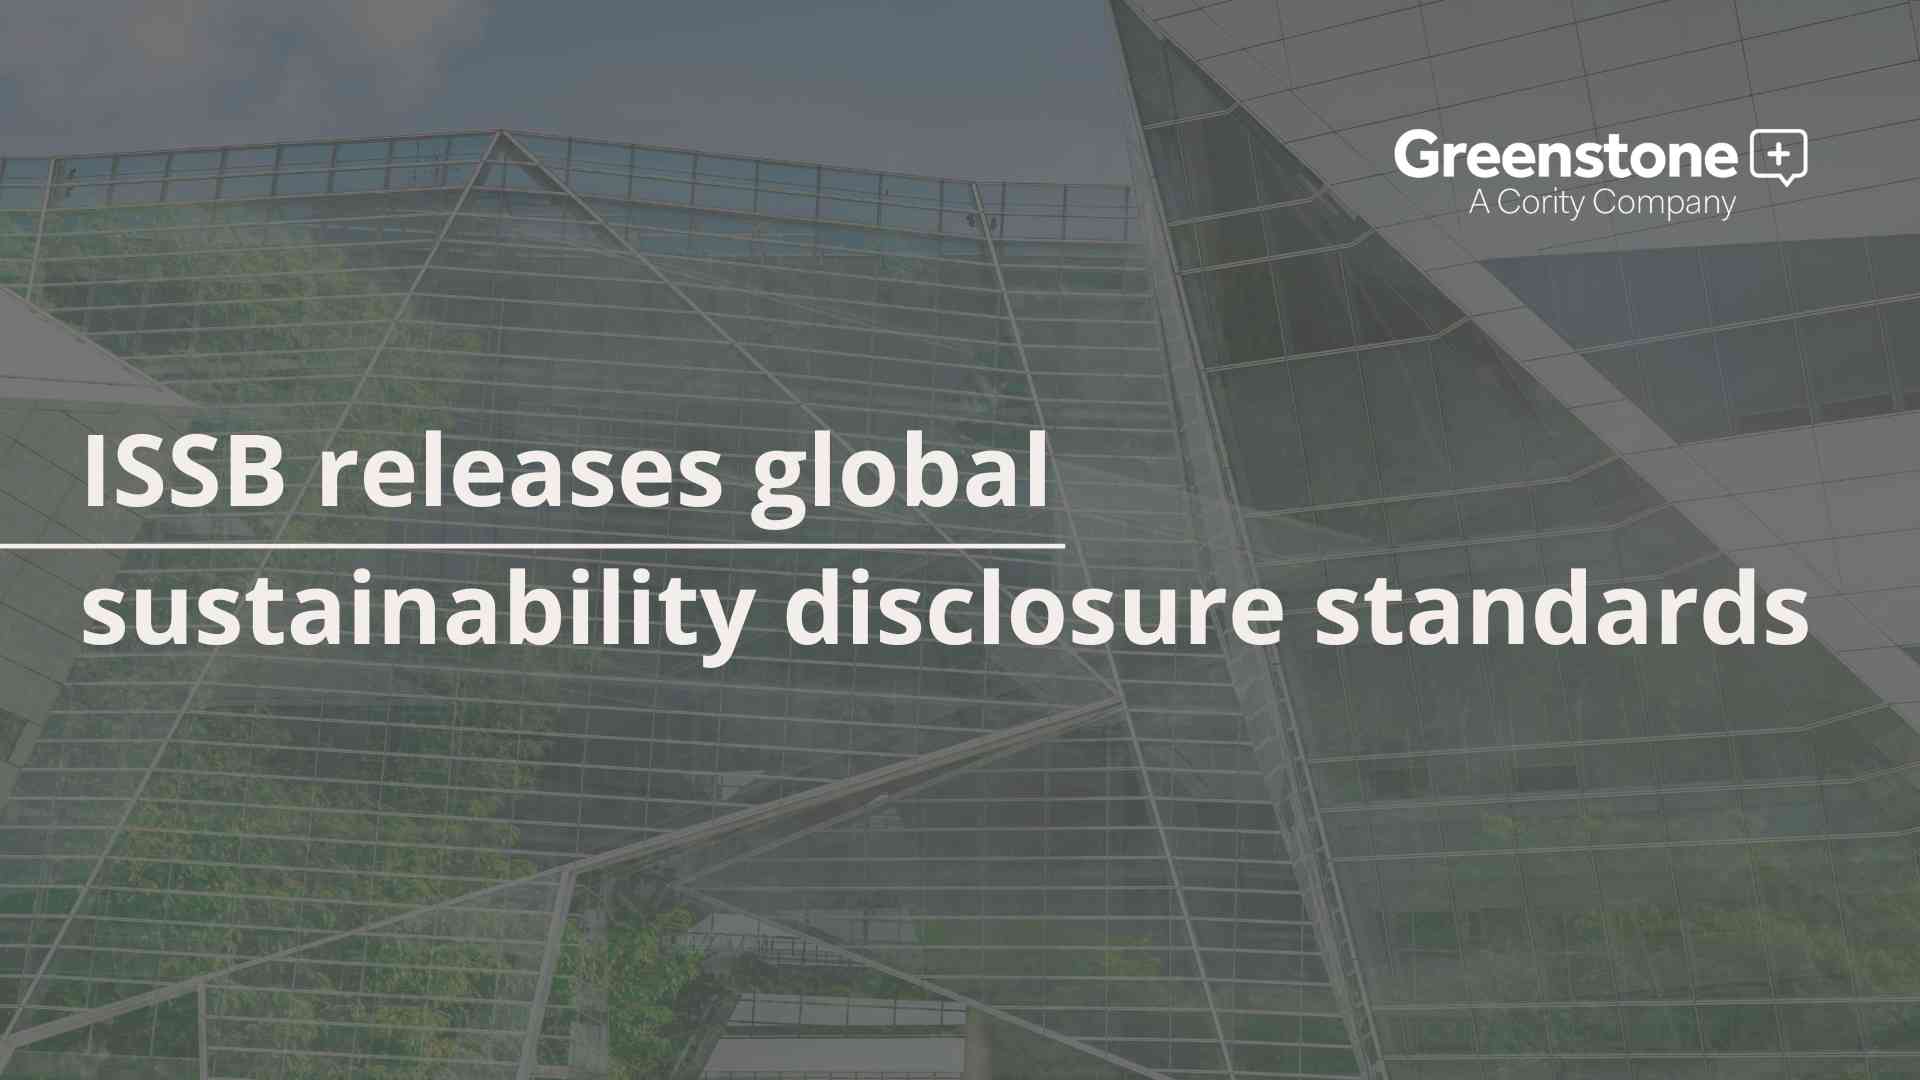 ISSB releases global sustainability disclosure standards